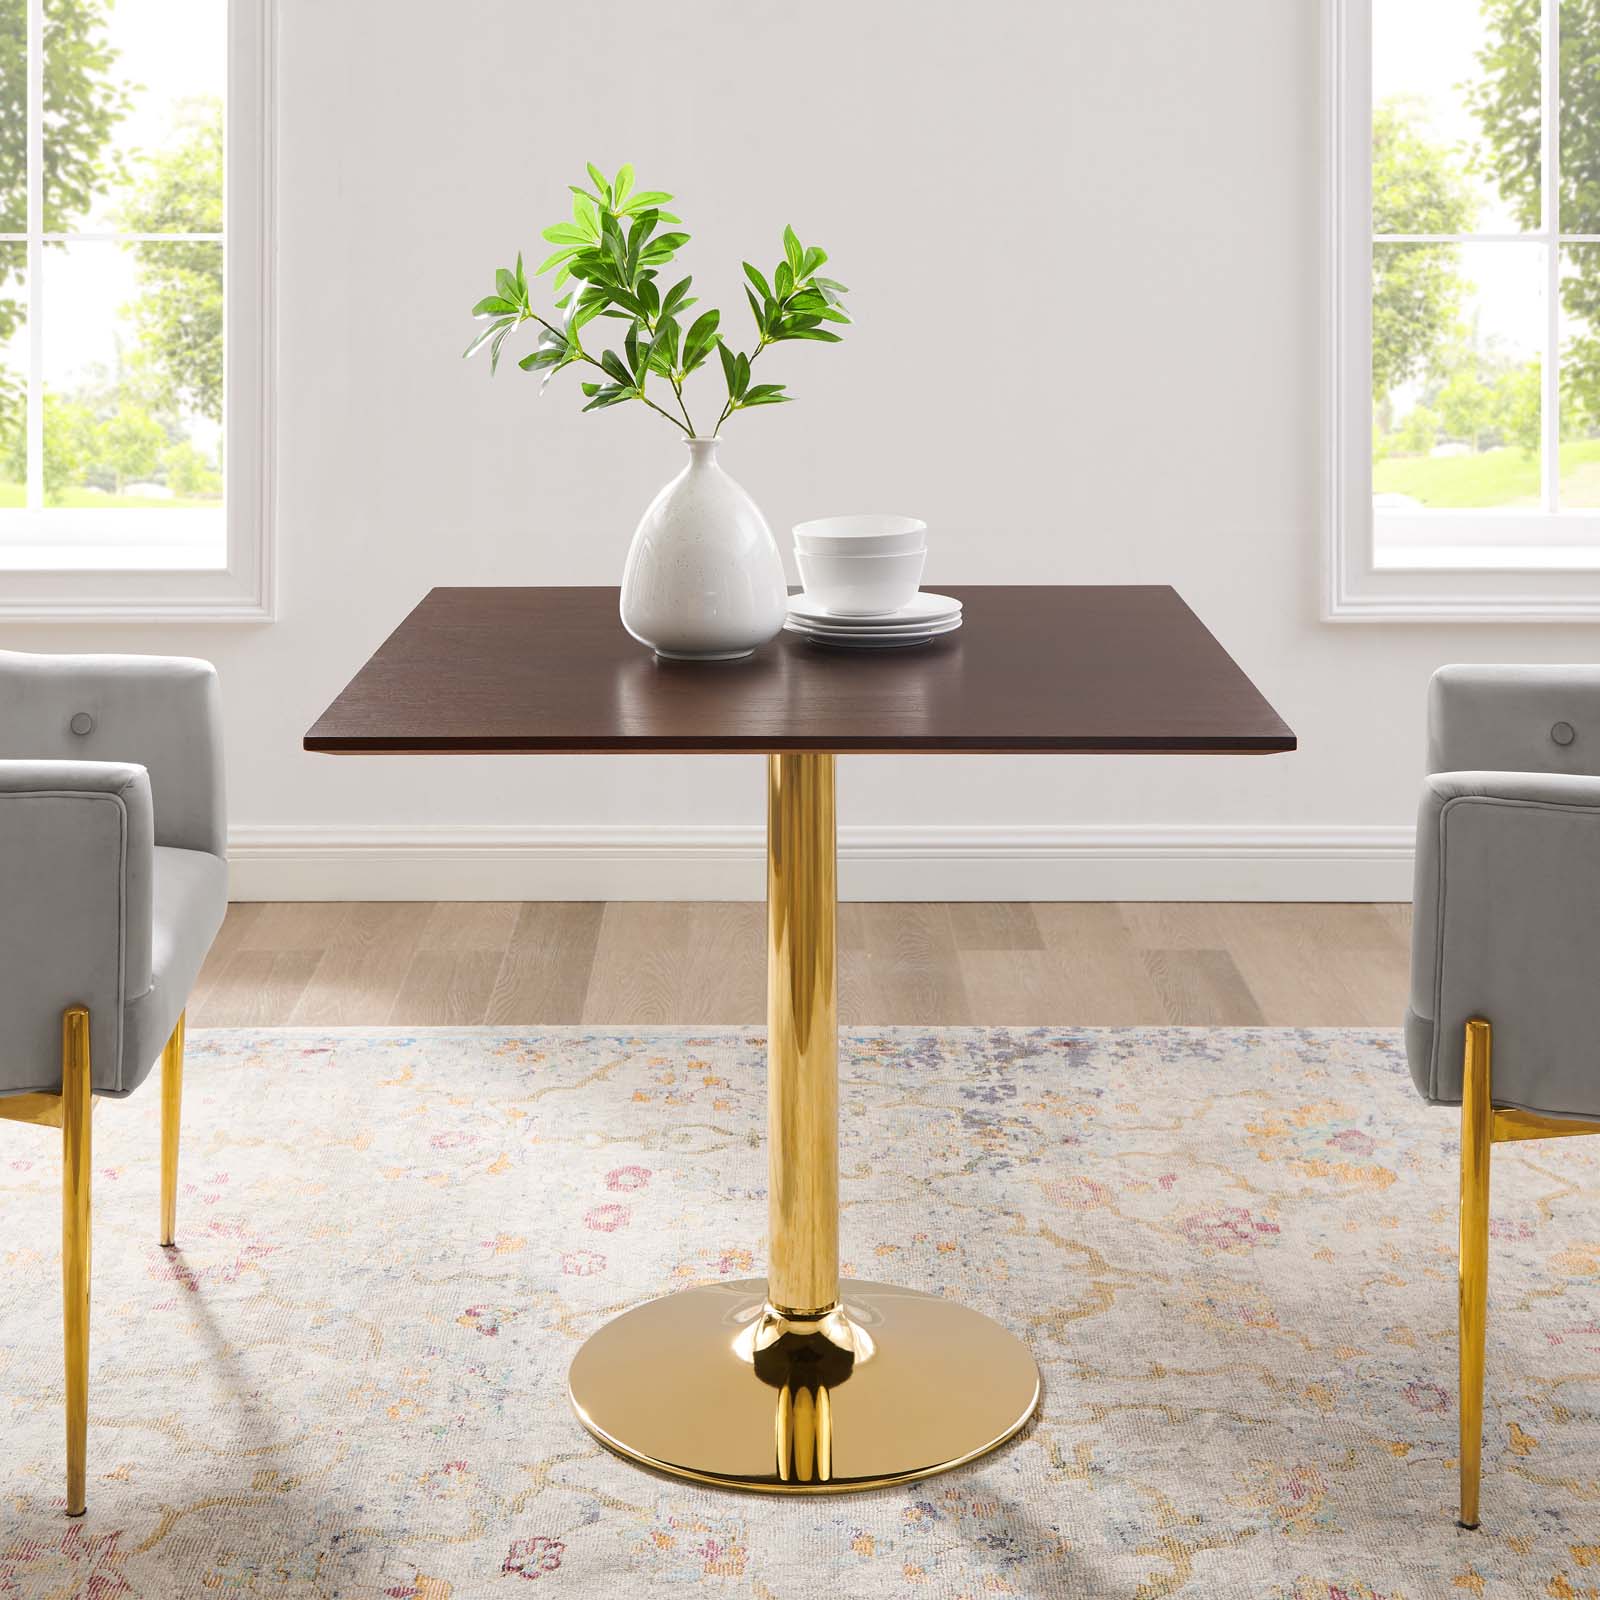 Verne 35" Square Dining Table - East Shore Modern Home Furnishings